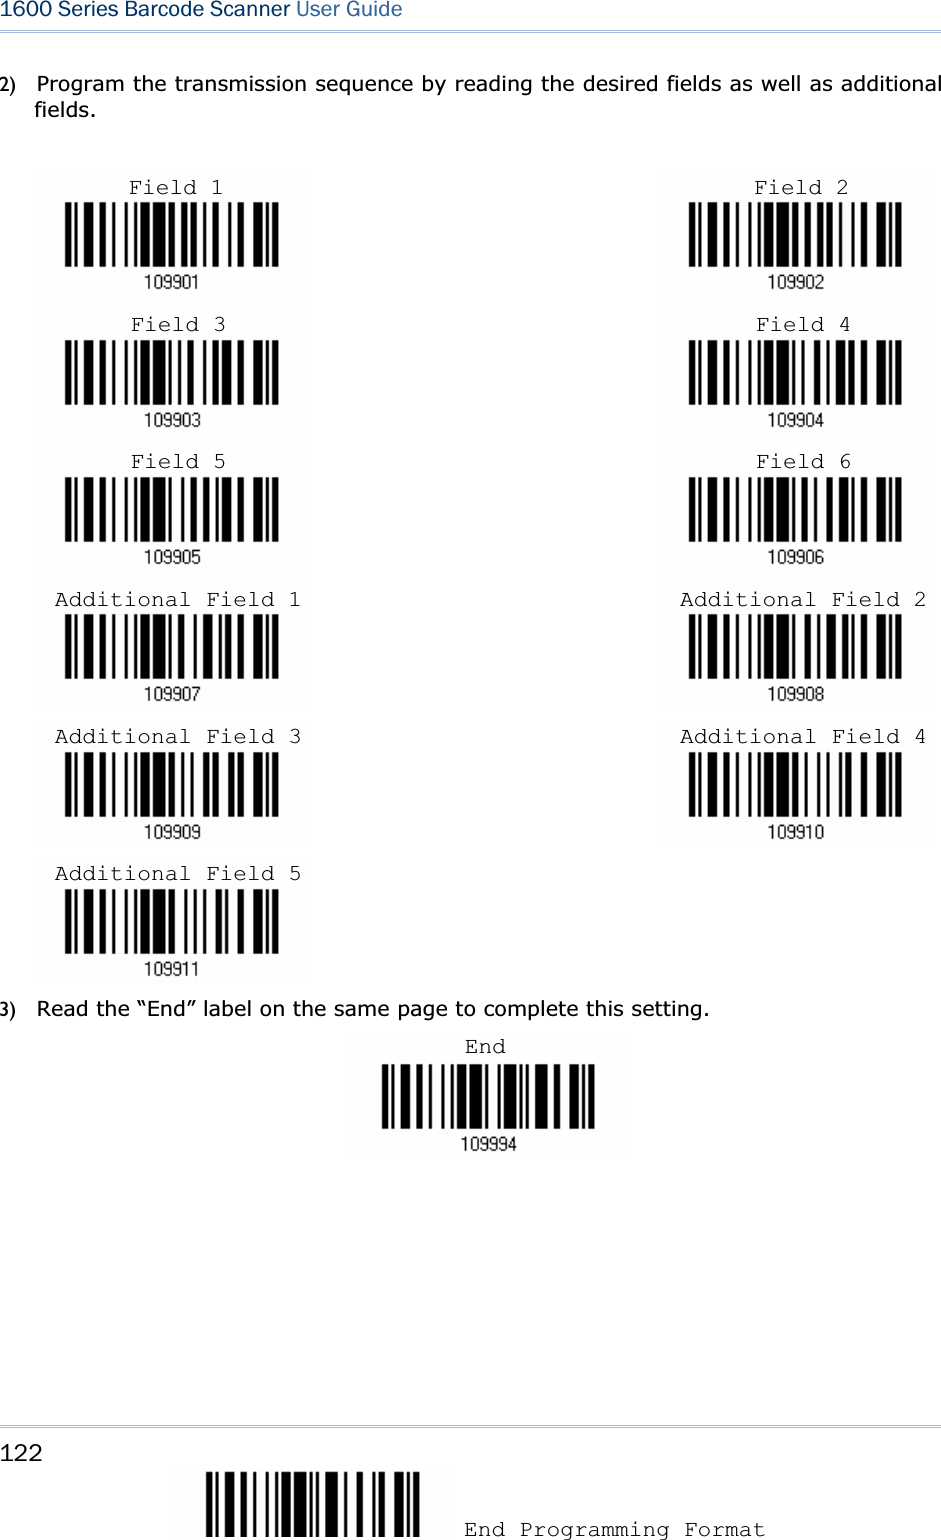 122 End Programming Format 1600 Series Barcode Scanner User Guide2) Program the transmission sequence by reading the desired fields as well as additional fields.                                                                                                                                                                                                             3) Read the “End” label on the same page to complete this setting. EndField 1 Field 2 Field 3 Field 4 Field 5 Field 6 Additional Field 1  Additional Field 2Additional Field 3  Additional Field 4Additional Field 5 